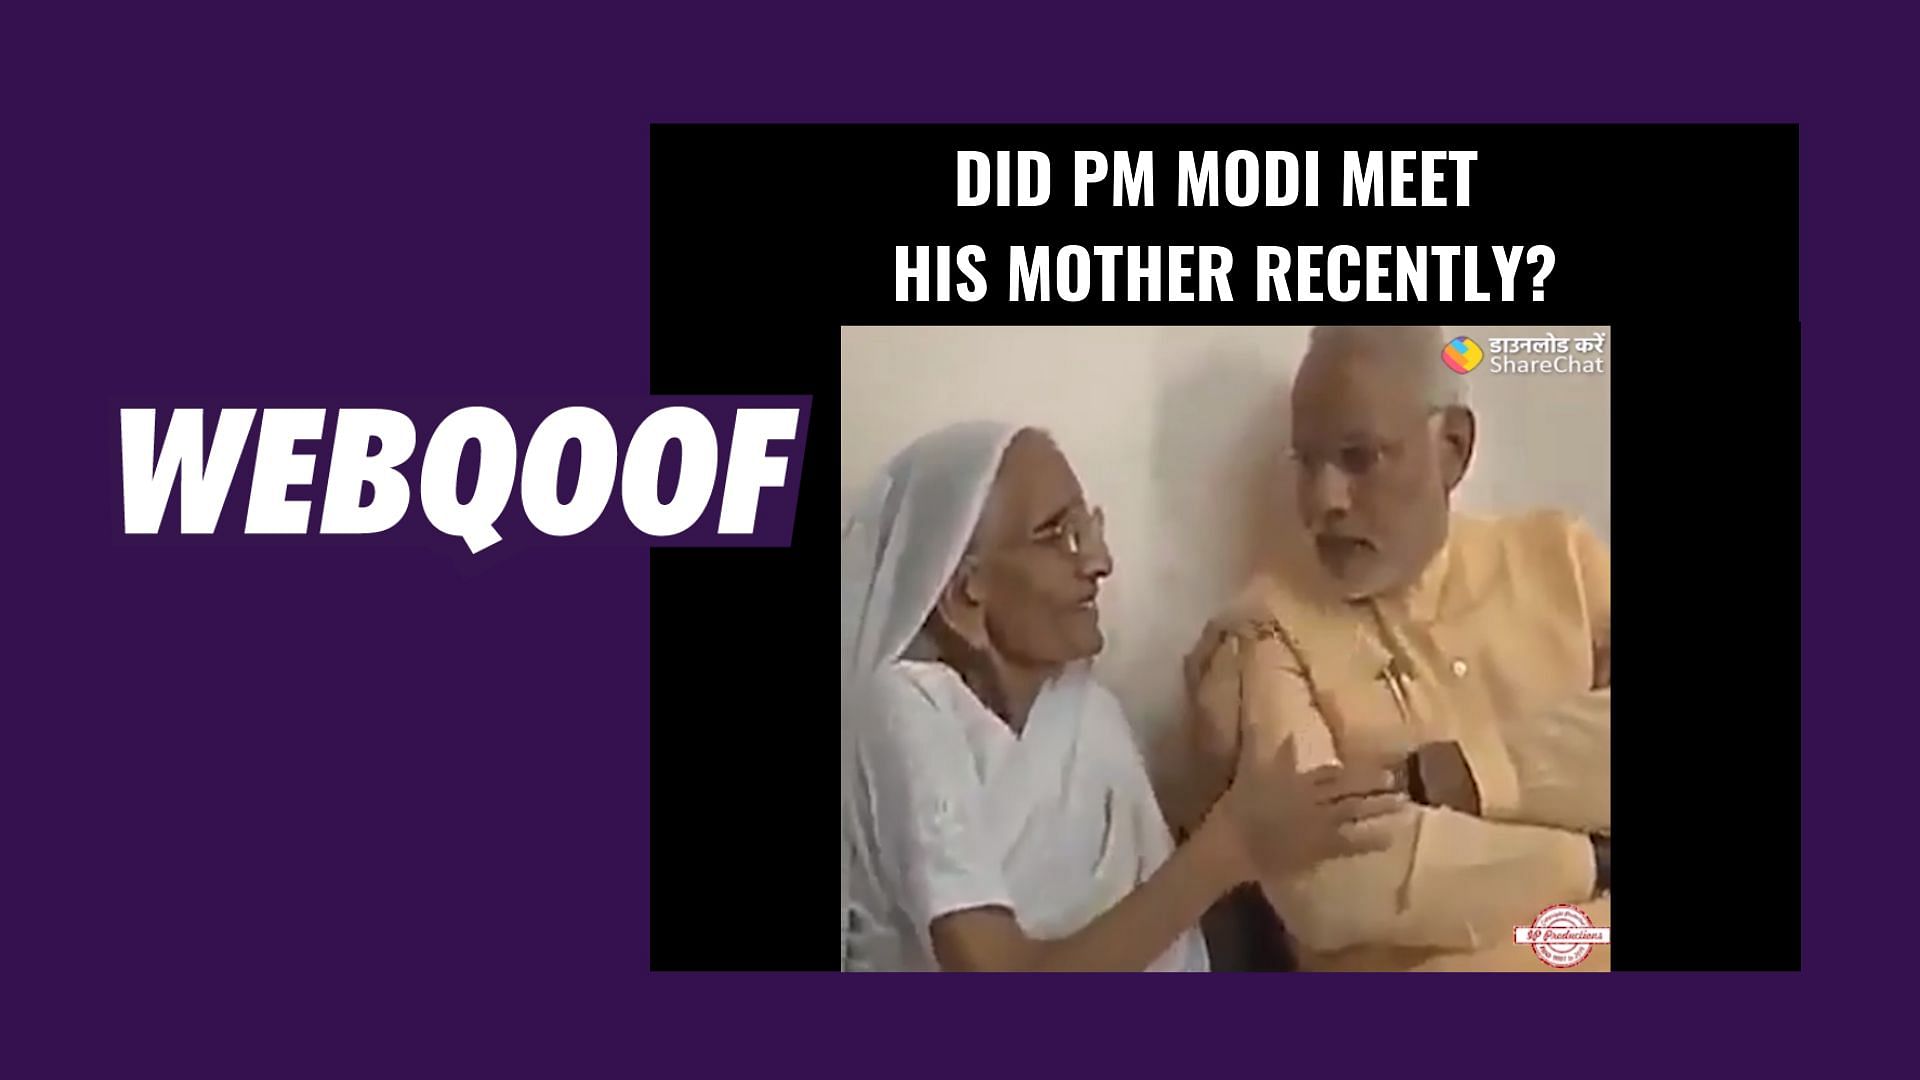 A viral video on social media falsely claimed that Prime Minister Narendra Modi met his mother recently.